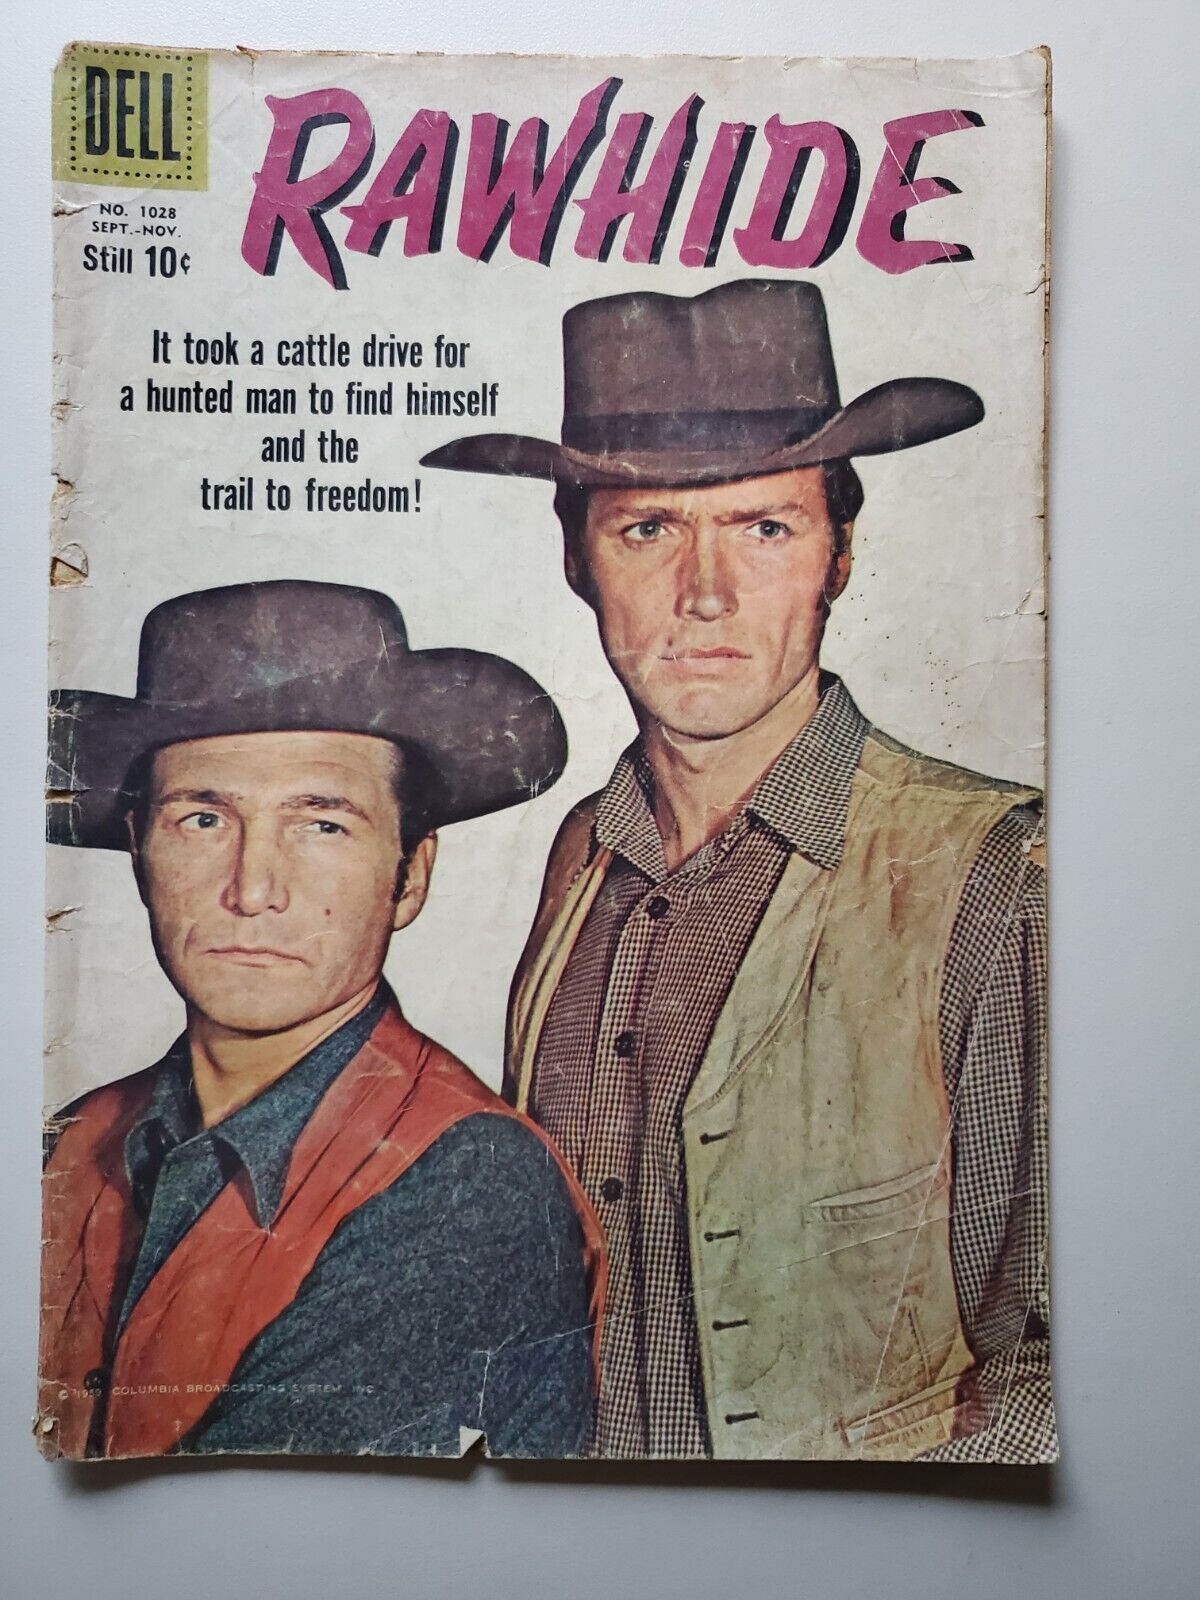 1959 Dell #1028 Comic Book (Rawhide #1) Clint Eastwood Photo Cover